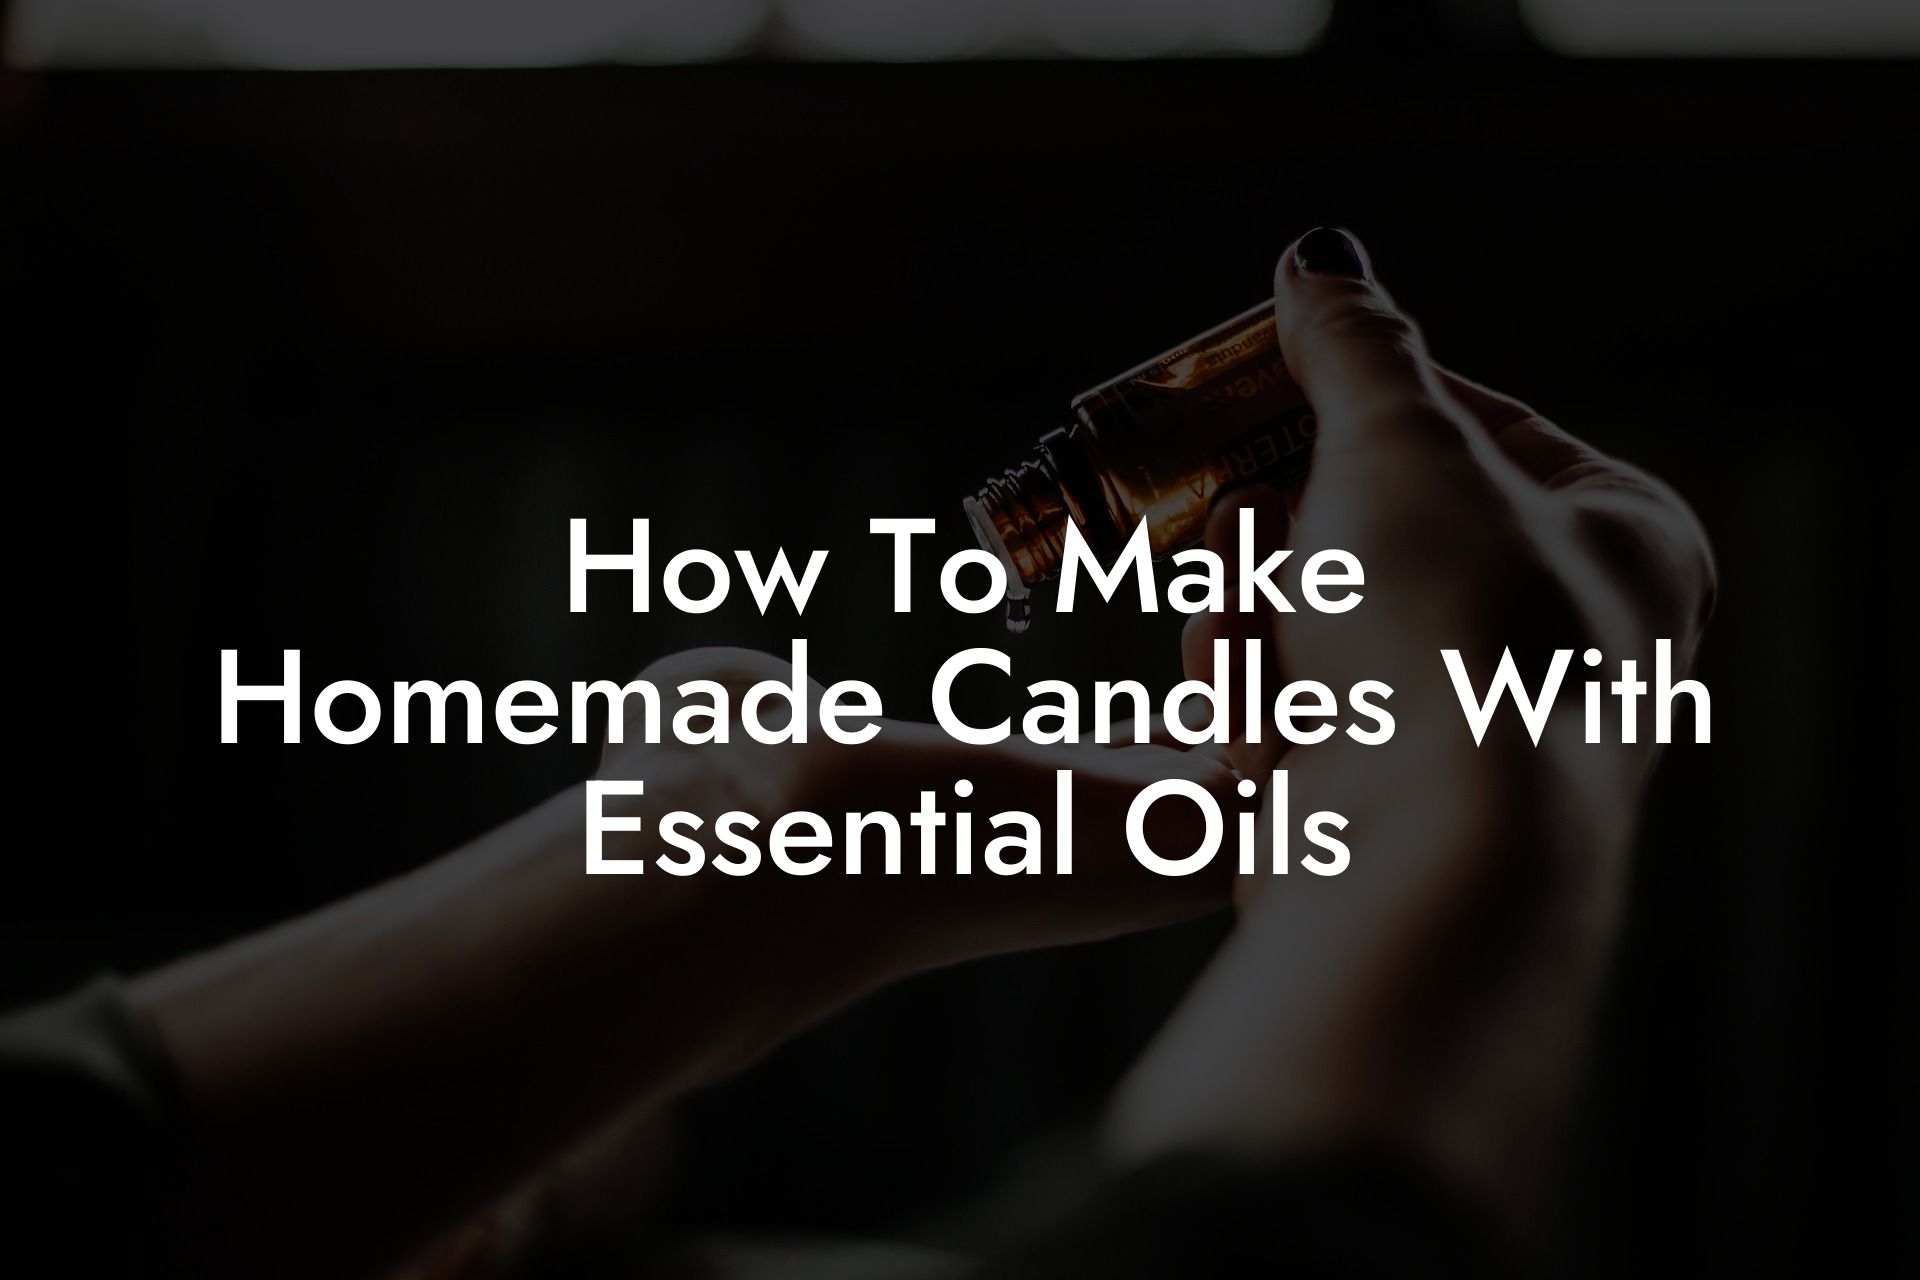 How To Make Homemade Candles With Essential Oils